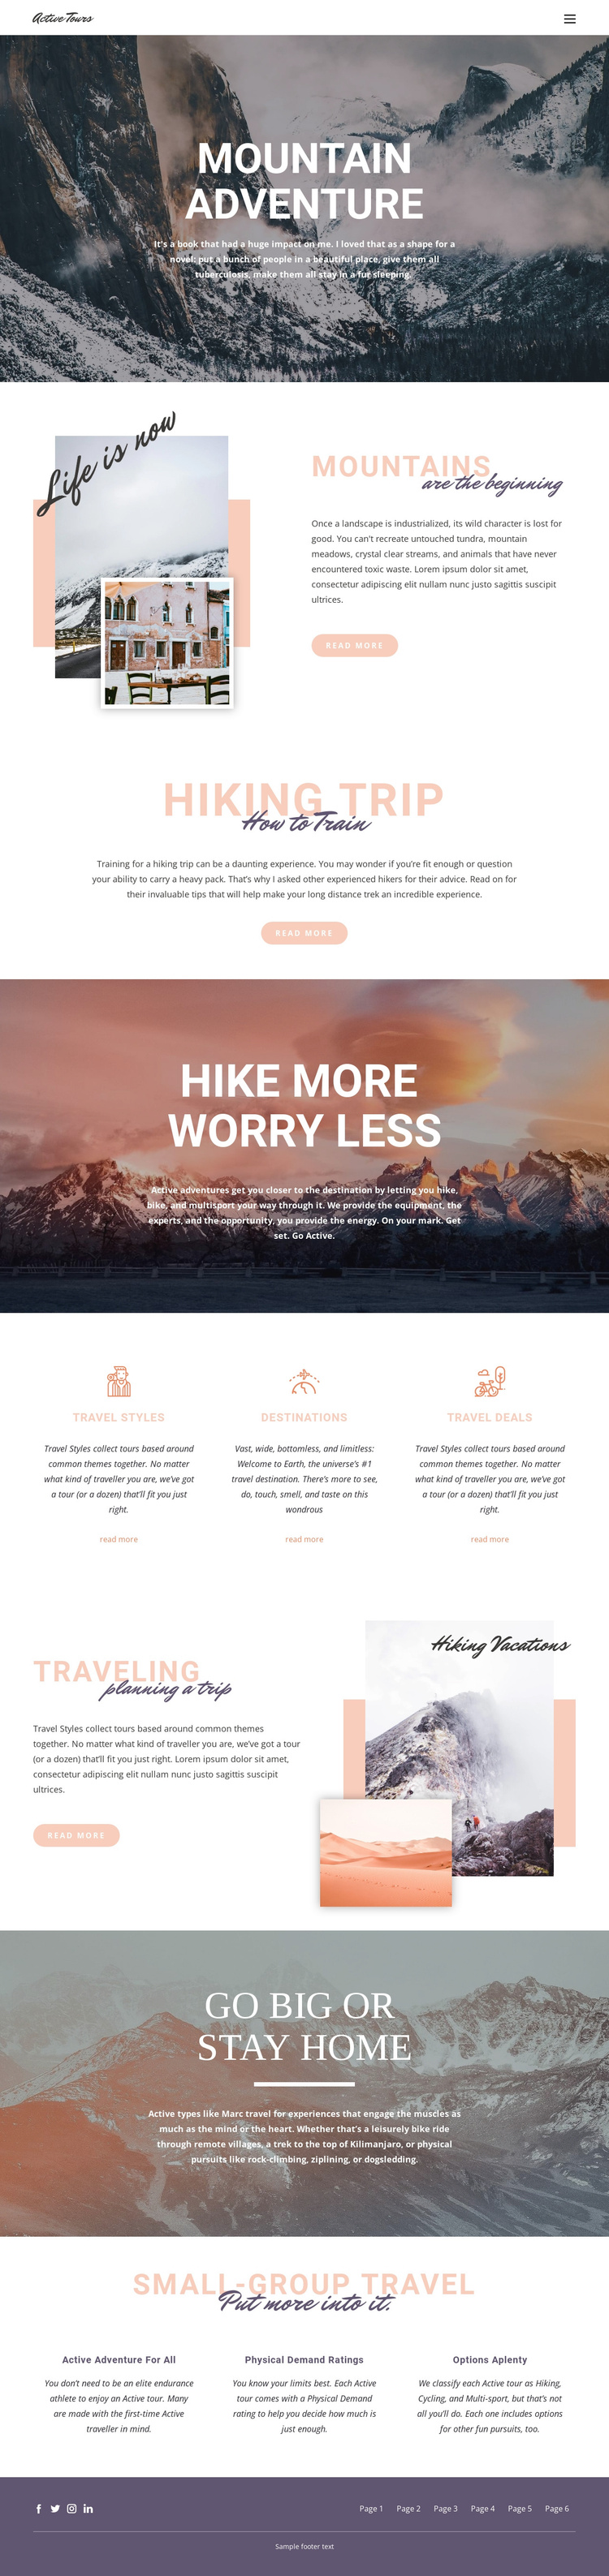 Guided backpacking trips Joomla Template